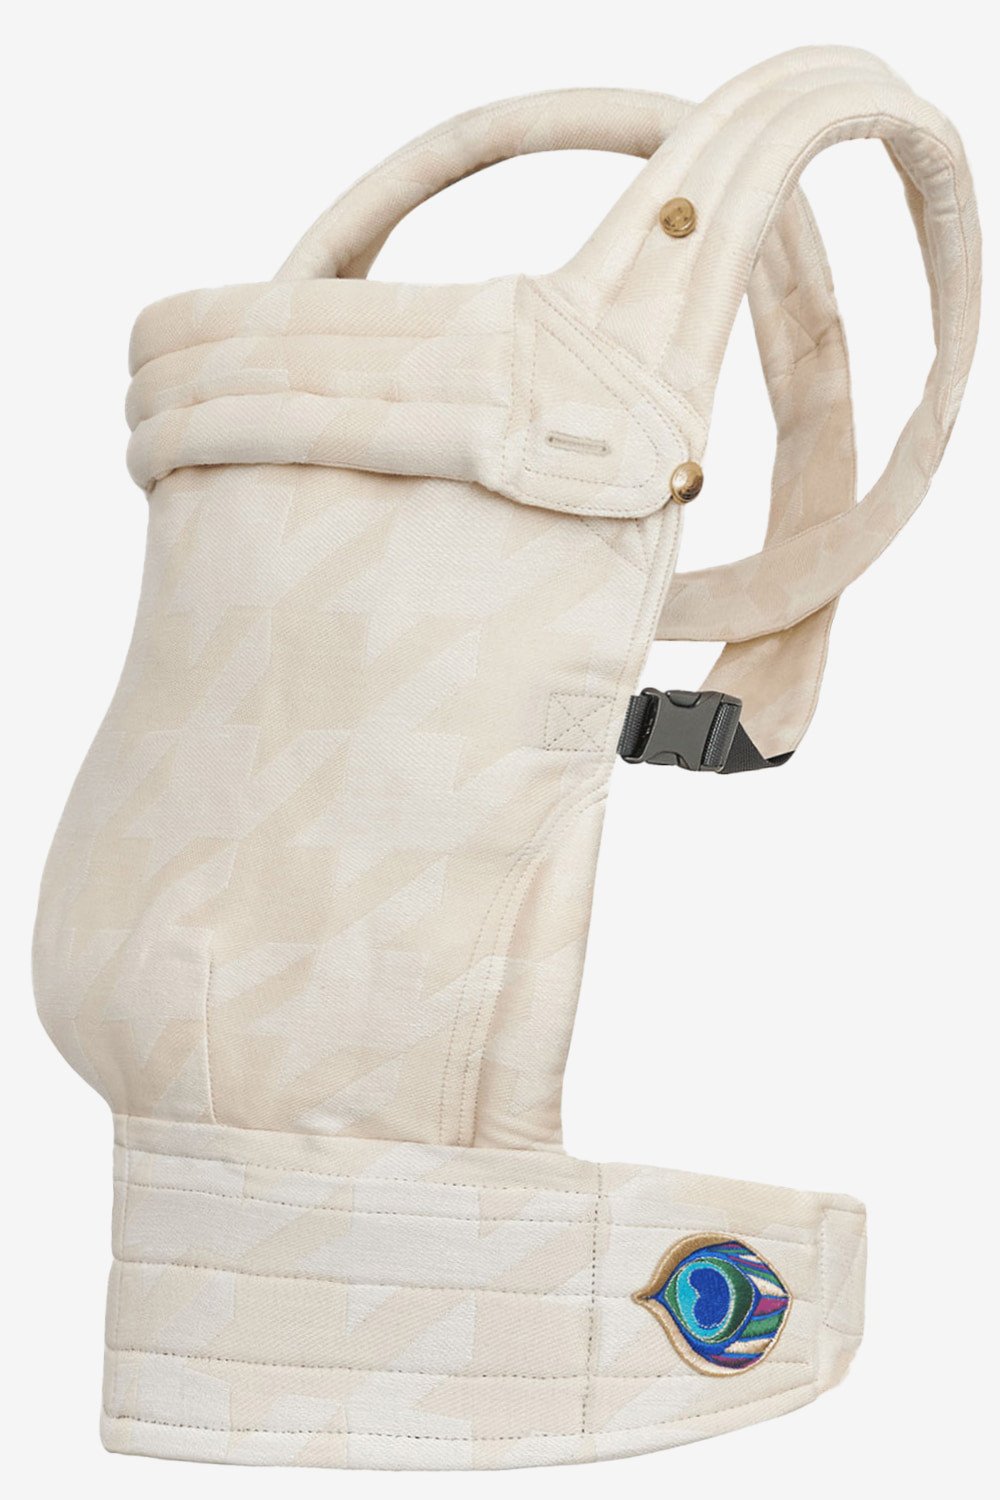 Ecru and white baby carrier with an tweed design in a cotton and hemp blend